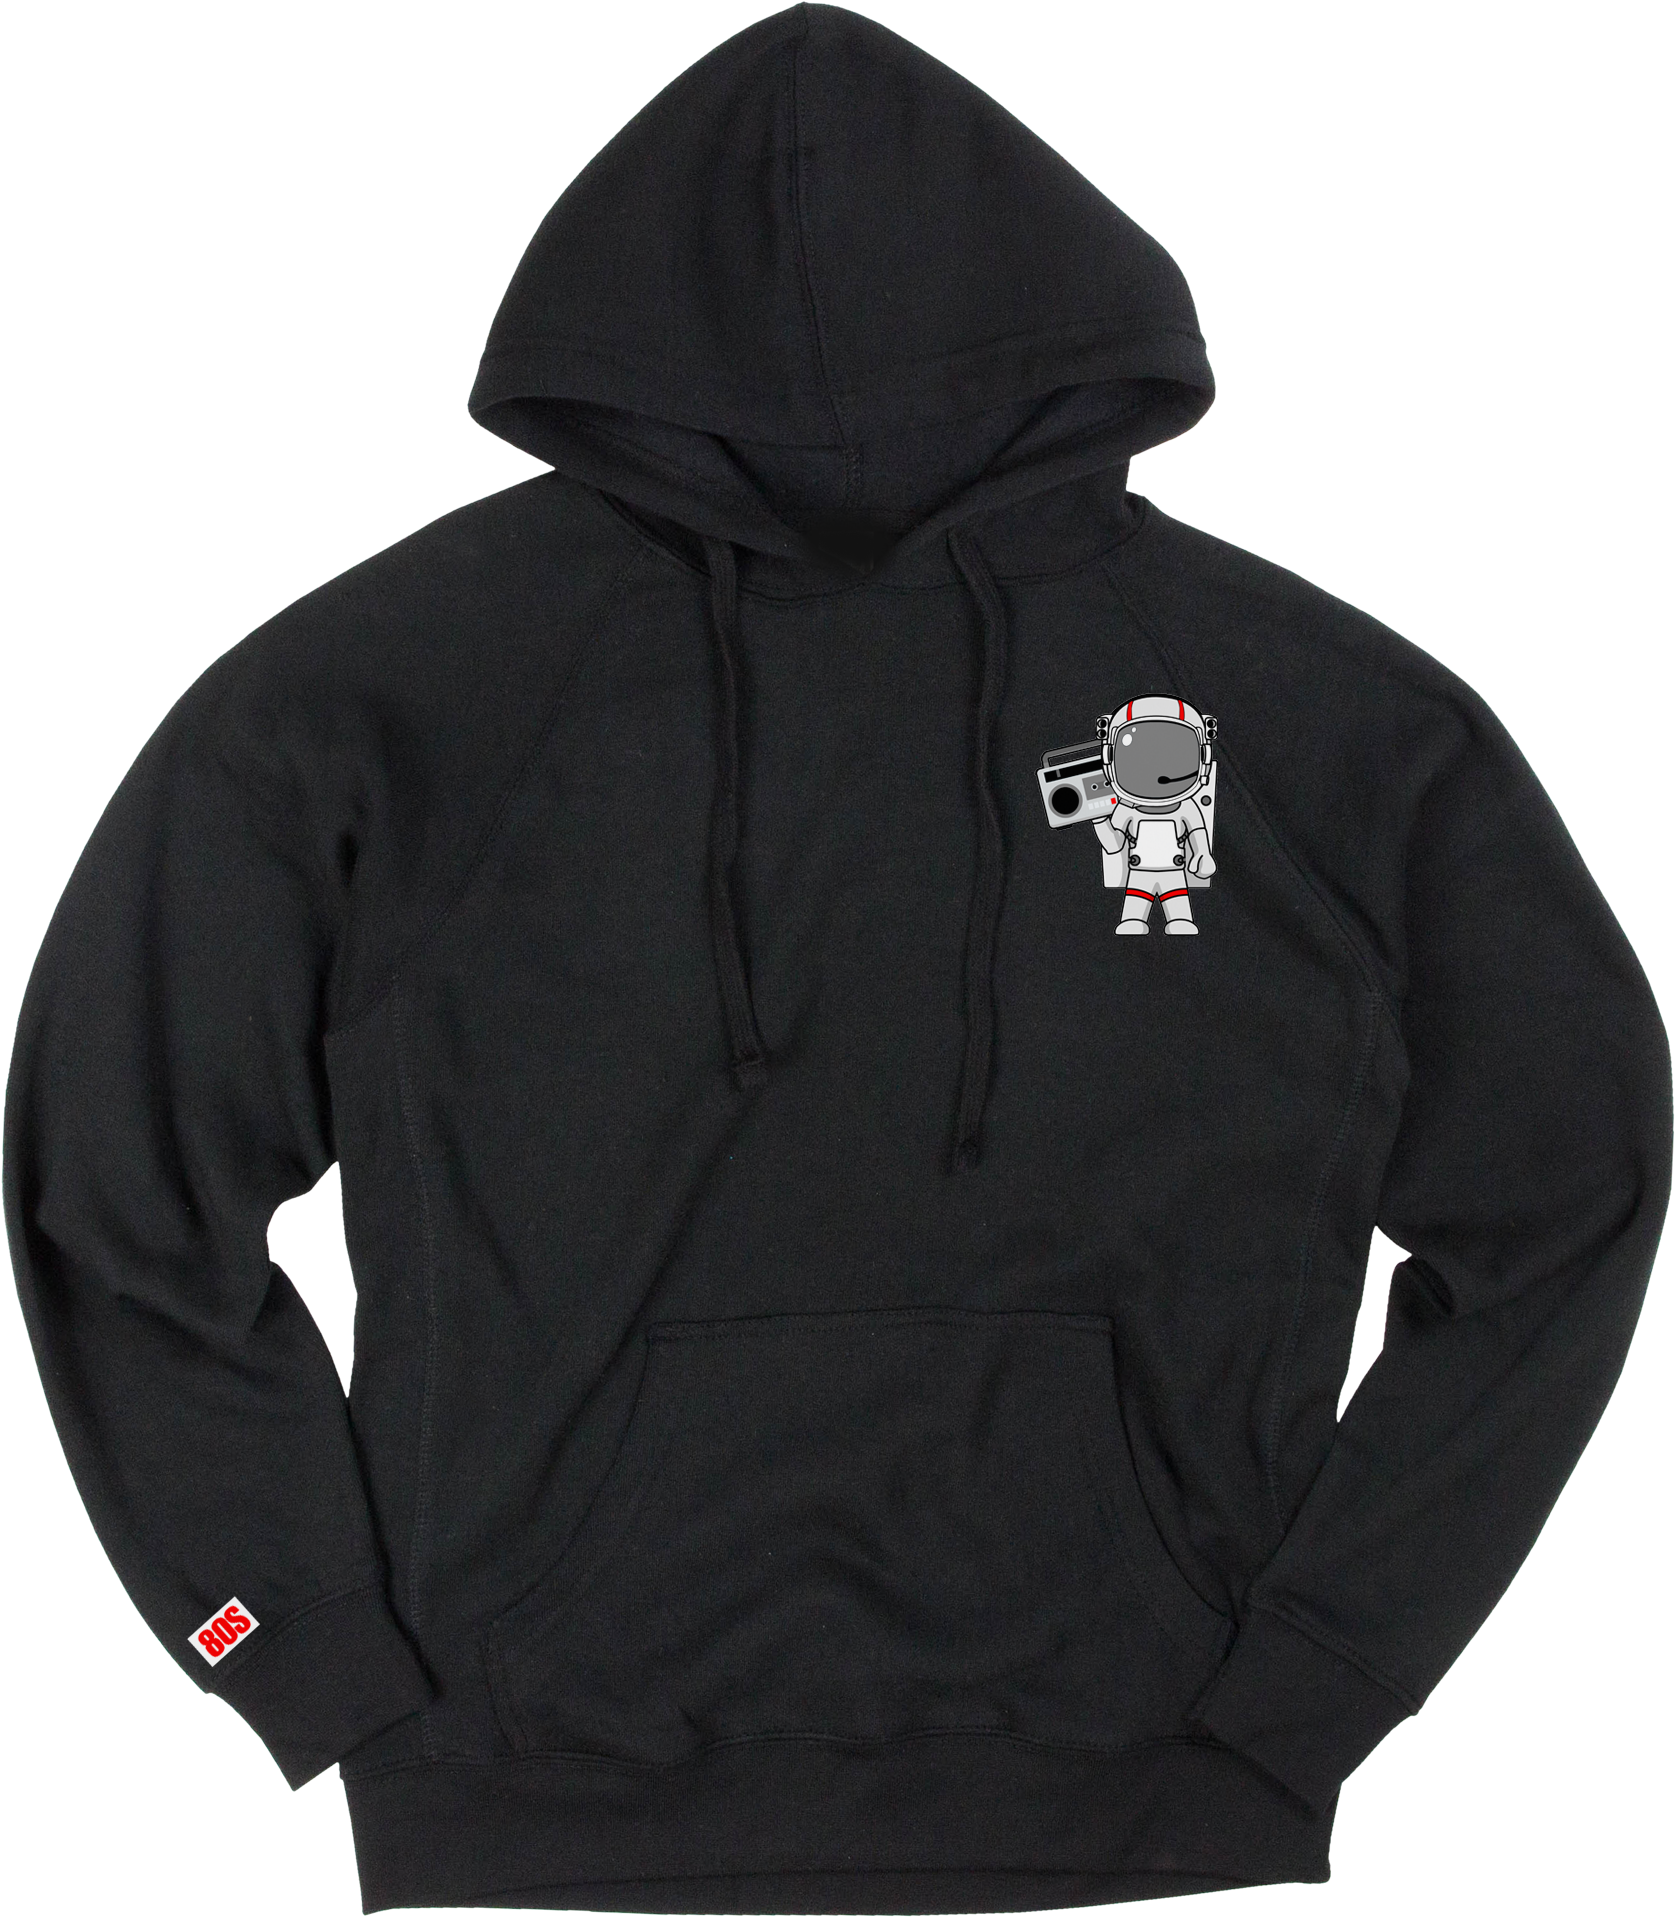 Astronaut Graphic Black Hoodie PNG image